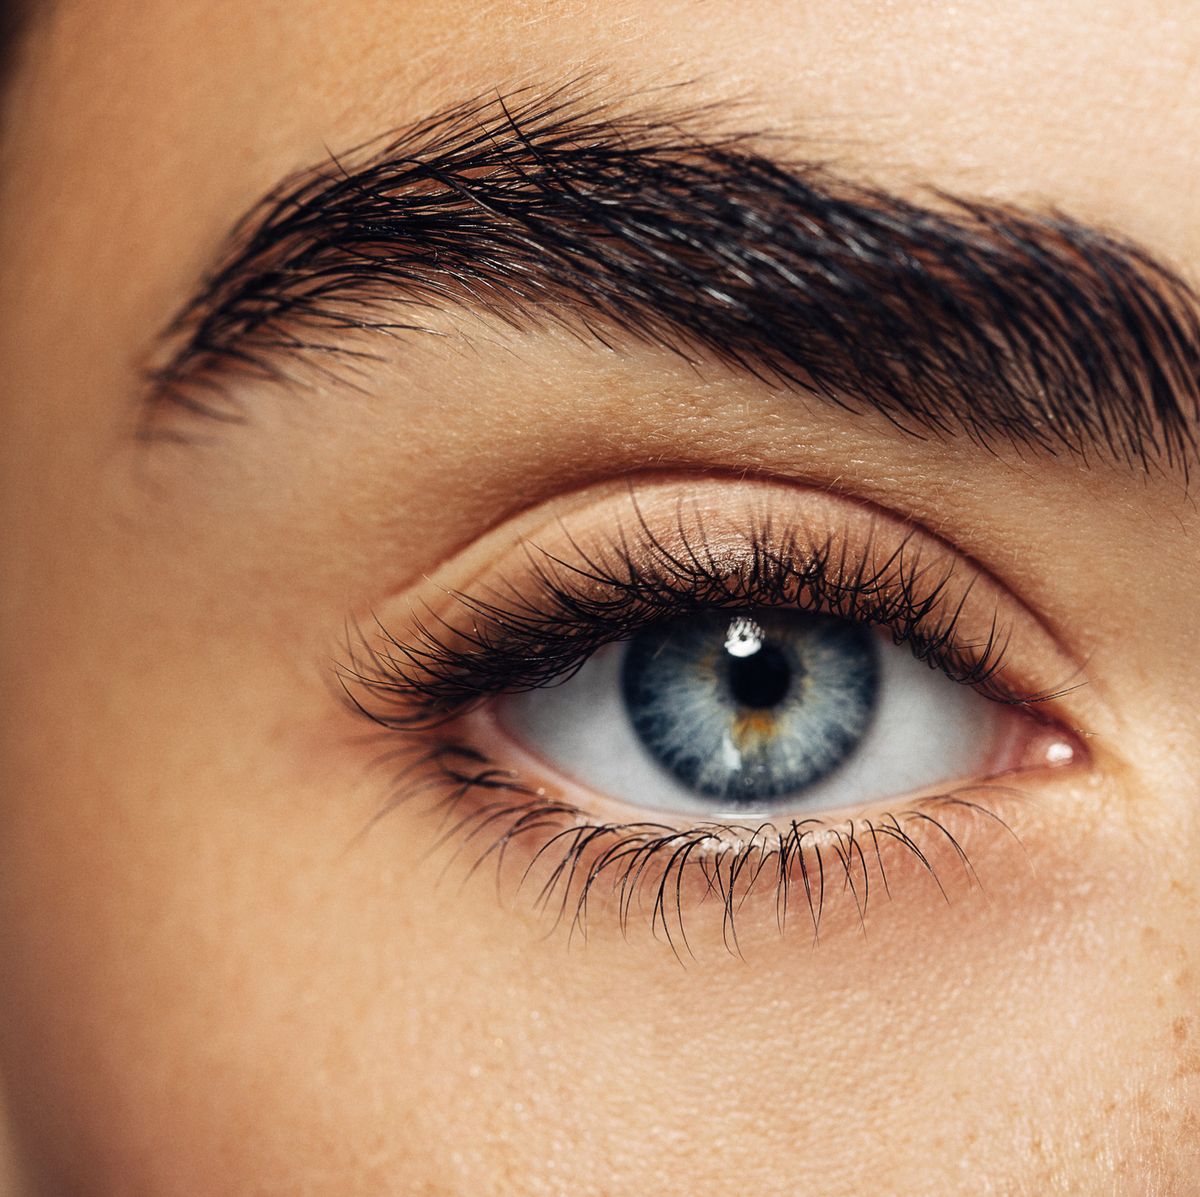 What is Eyebrow Tinting - Brow Tinting Cost and Safety